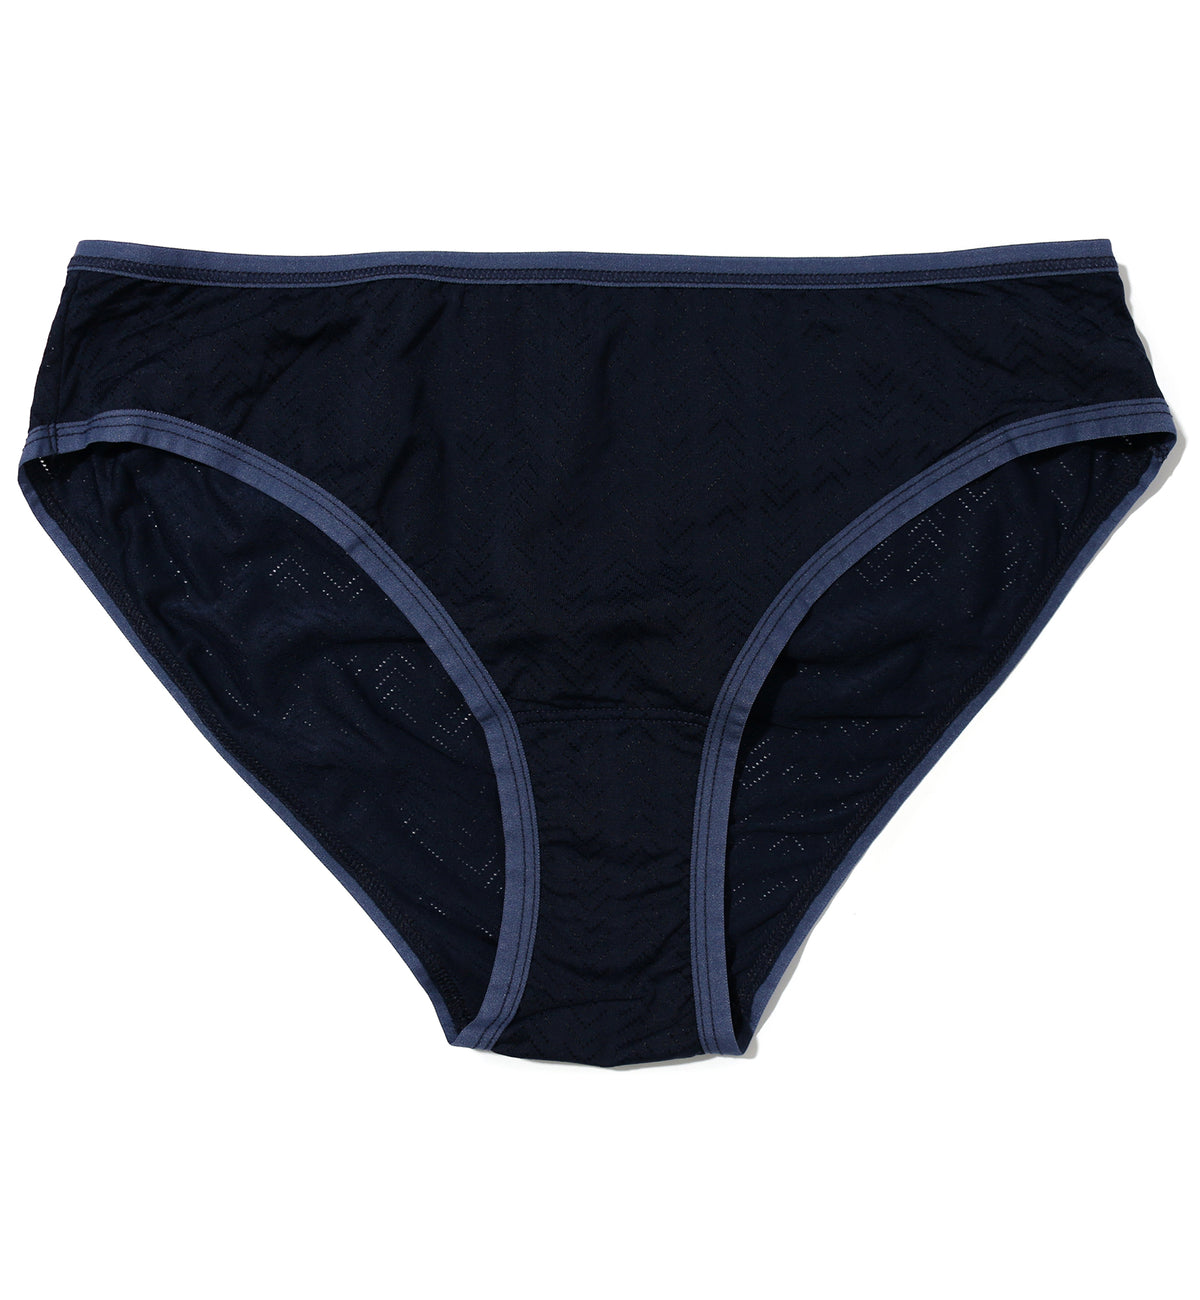 Hanky Panky MoveCalm Ruched Back Brief (2P2184),XS,Blackberry Crumble/Waterfall Blue - Blackberry Crumble/Waterfall Blue,XS